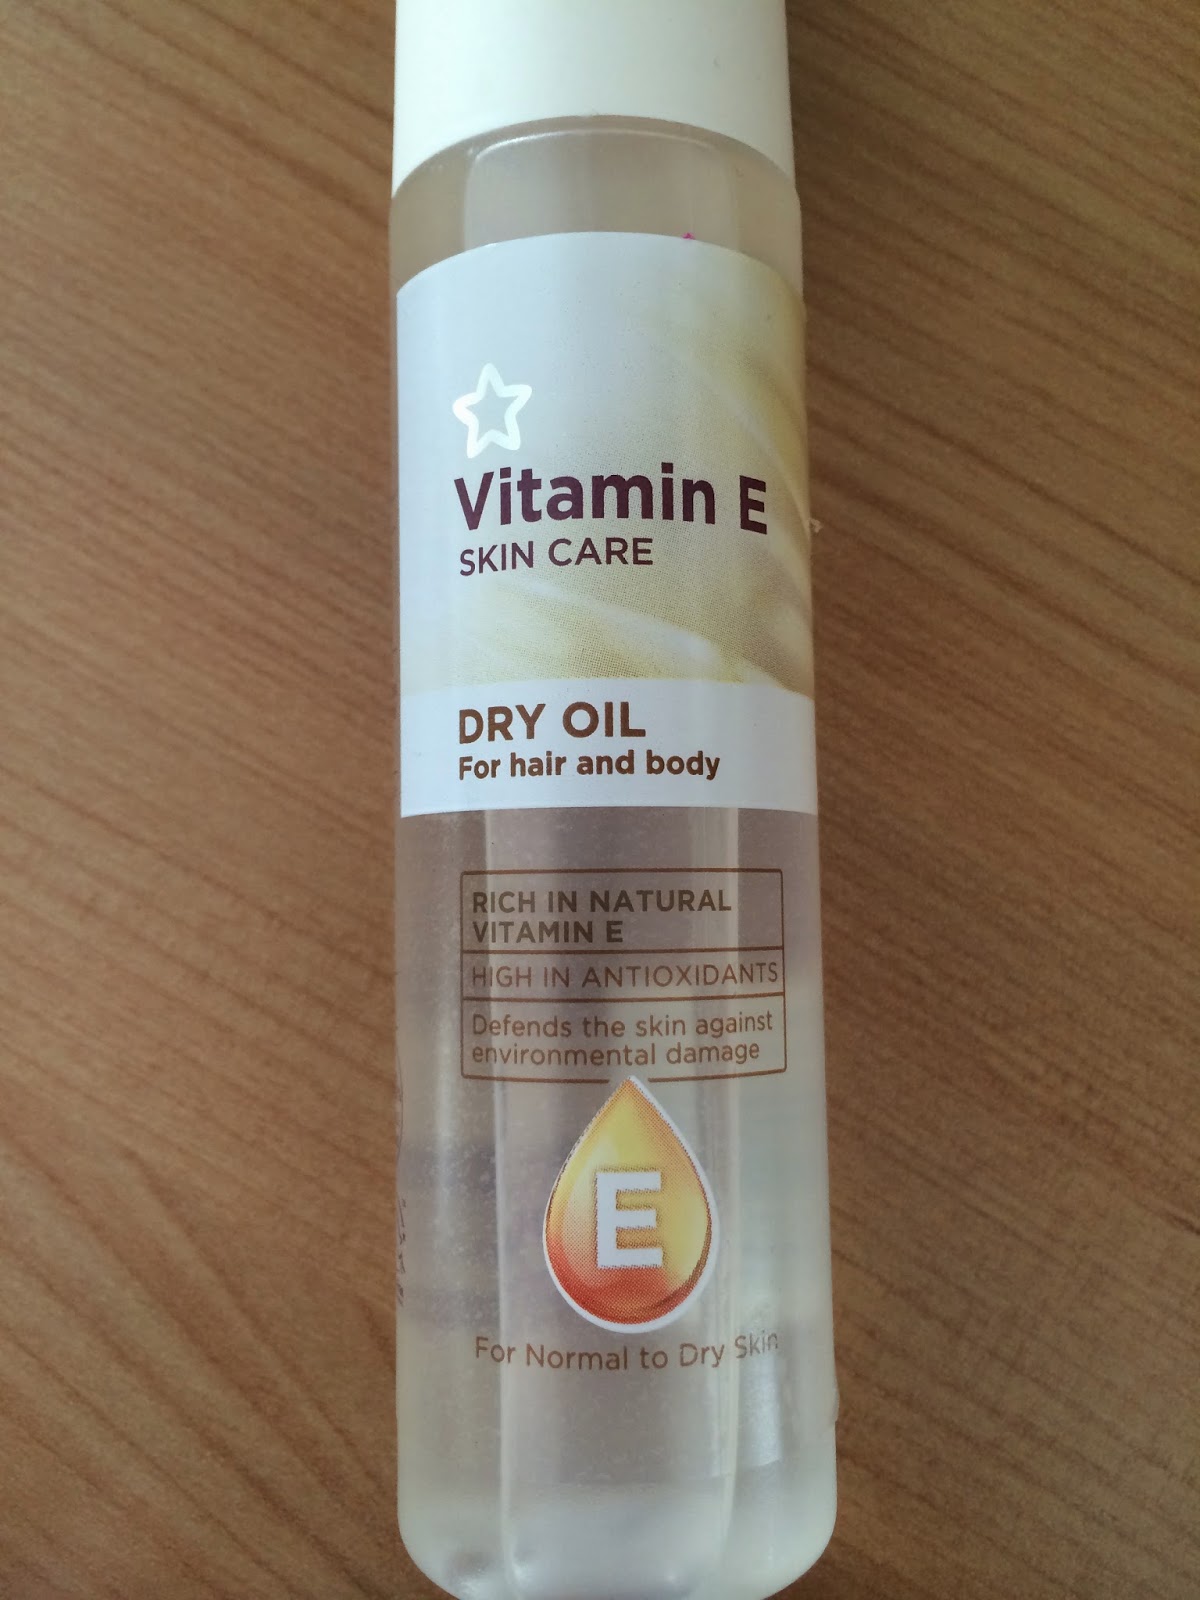 TreaclesSecrets Review Vitamin E Dry Oil For Hair Body